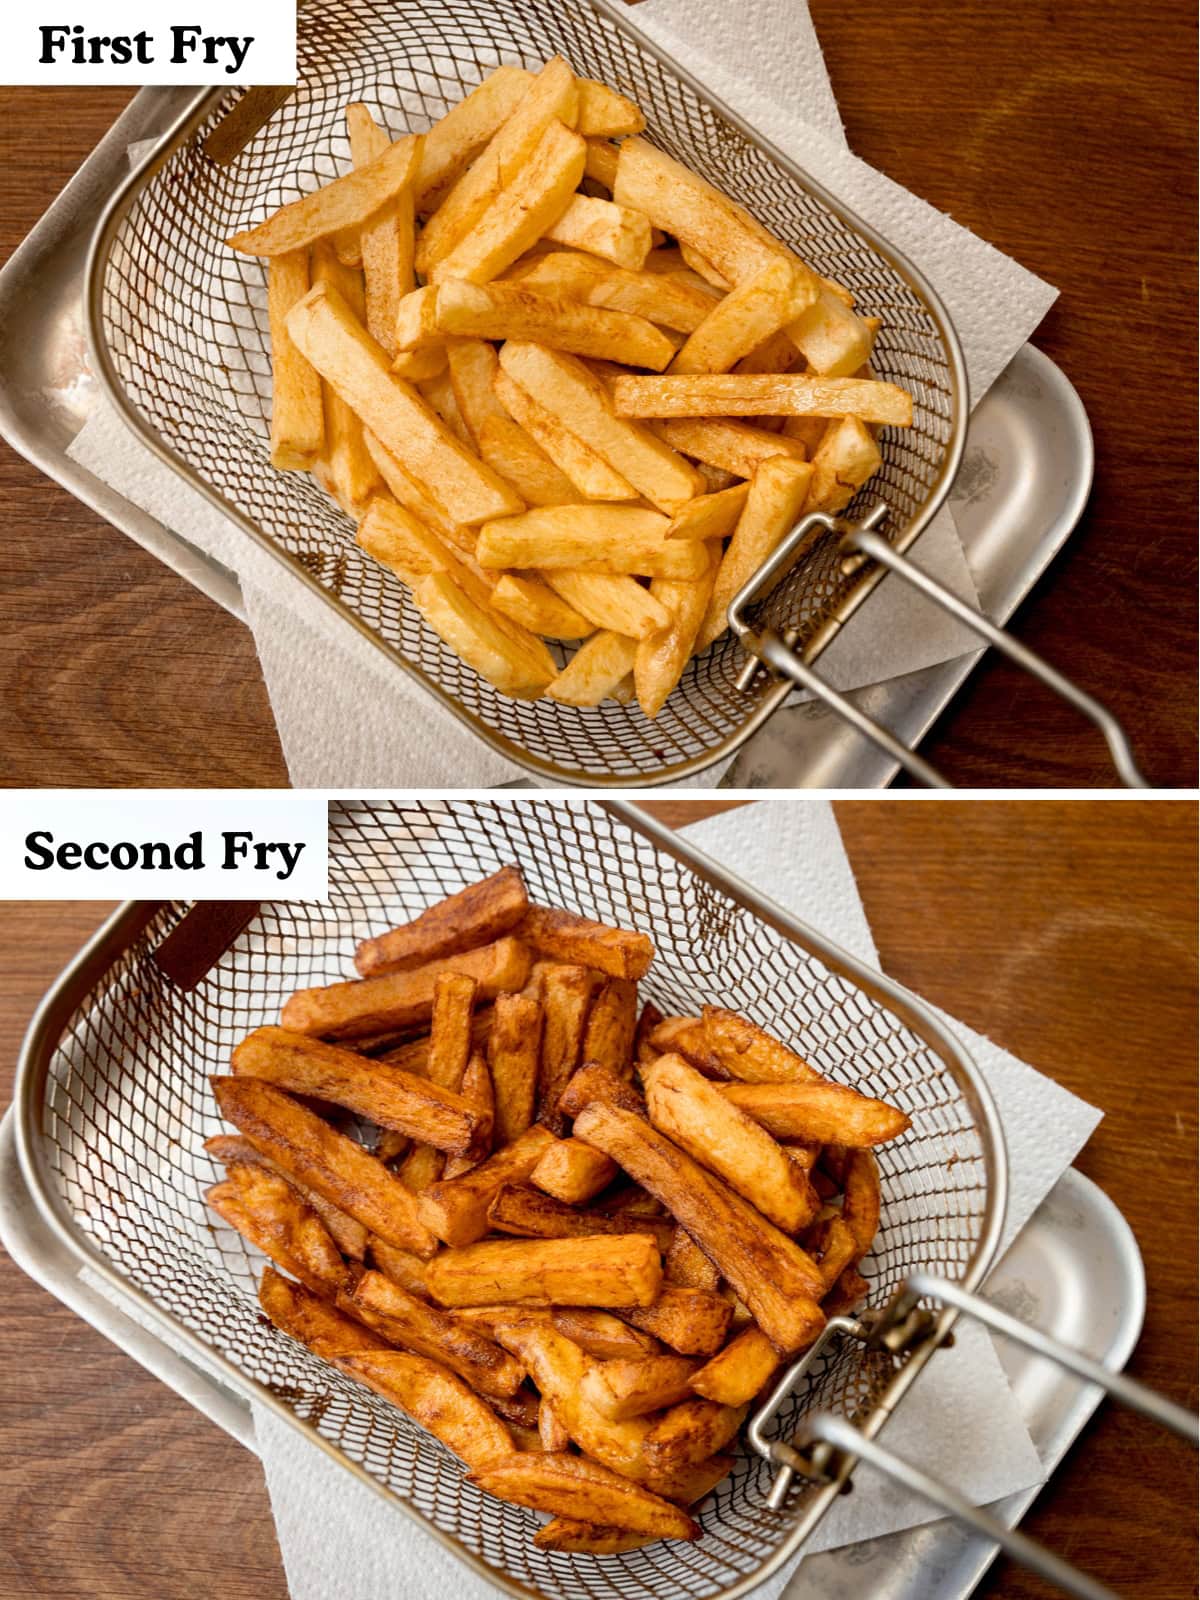 Two wide images stacked one on top of the other. Both images have a white text box in the top left corner with black text in them. The top image says "First Fry" and shows the Chip Shop-Style Chips in a silver frying basket, which is placed on top of a silver tray which is lined with white tissue. It is placed on a wooden cutting board. The bottom image says "Second Fry" and is identical to the top image, except the chips are a much darker brown than the chips in the top image.